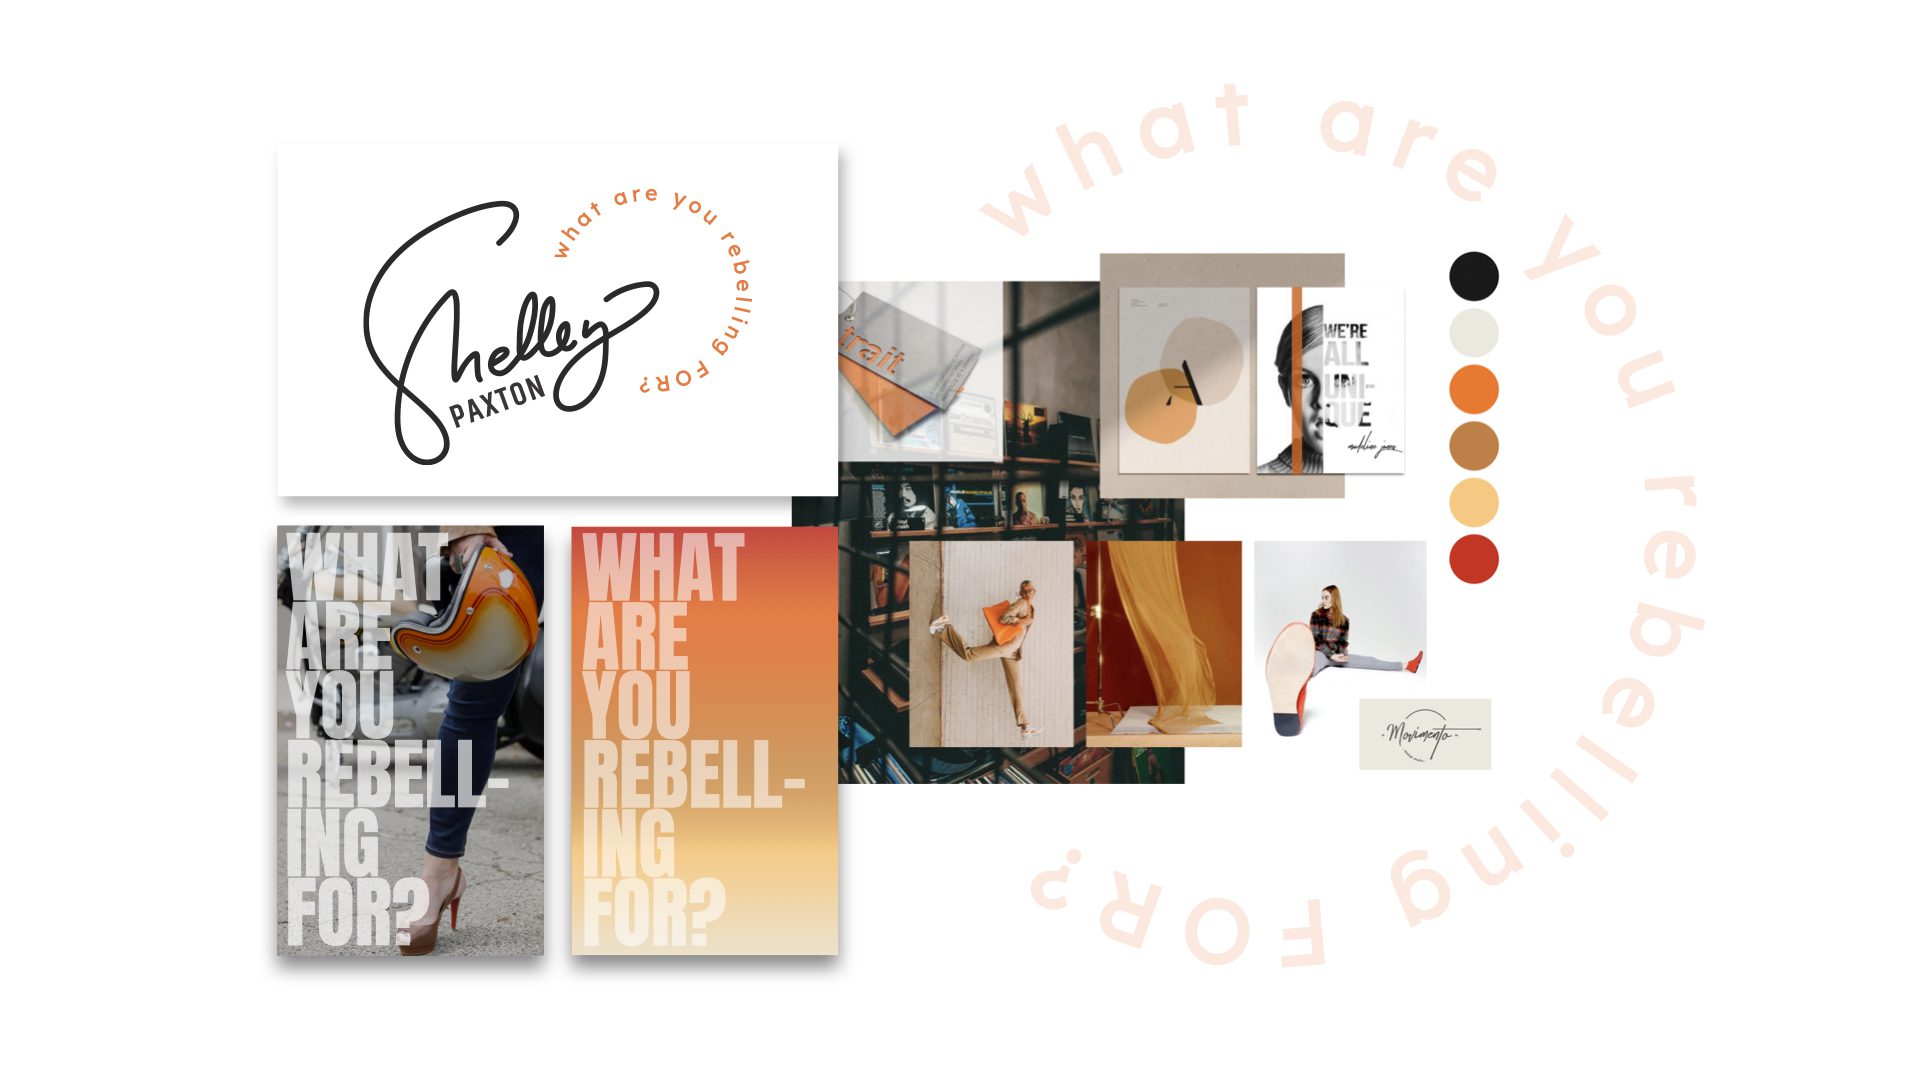 Shelley Paxton - Client Story - Visual Brand